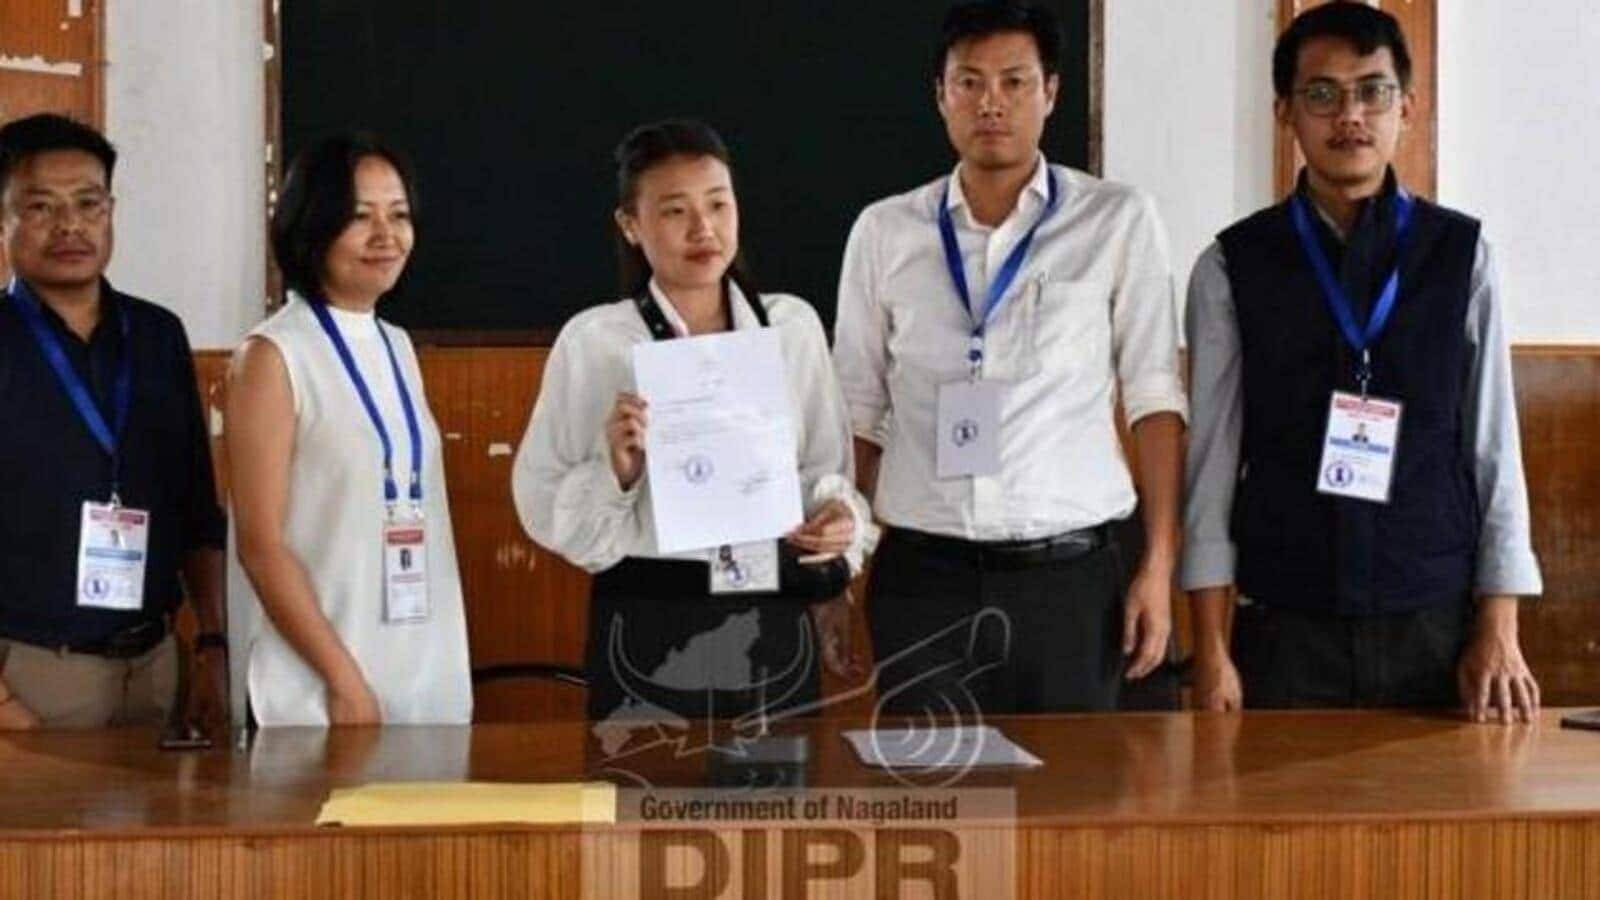 102 women elected in Nagaland civic body polls; 22-year-old youngest  